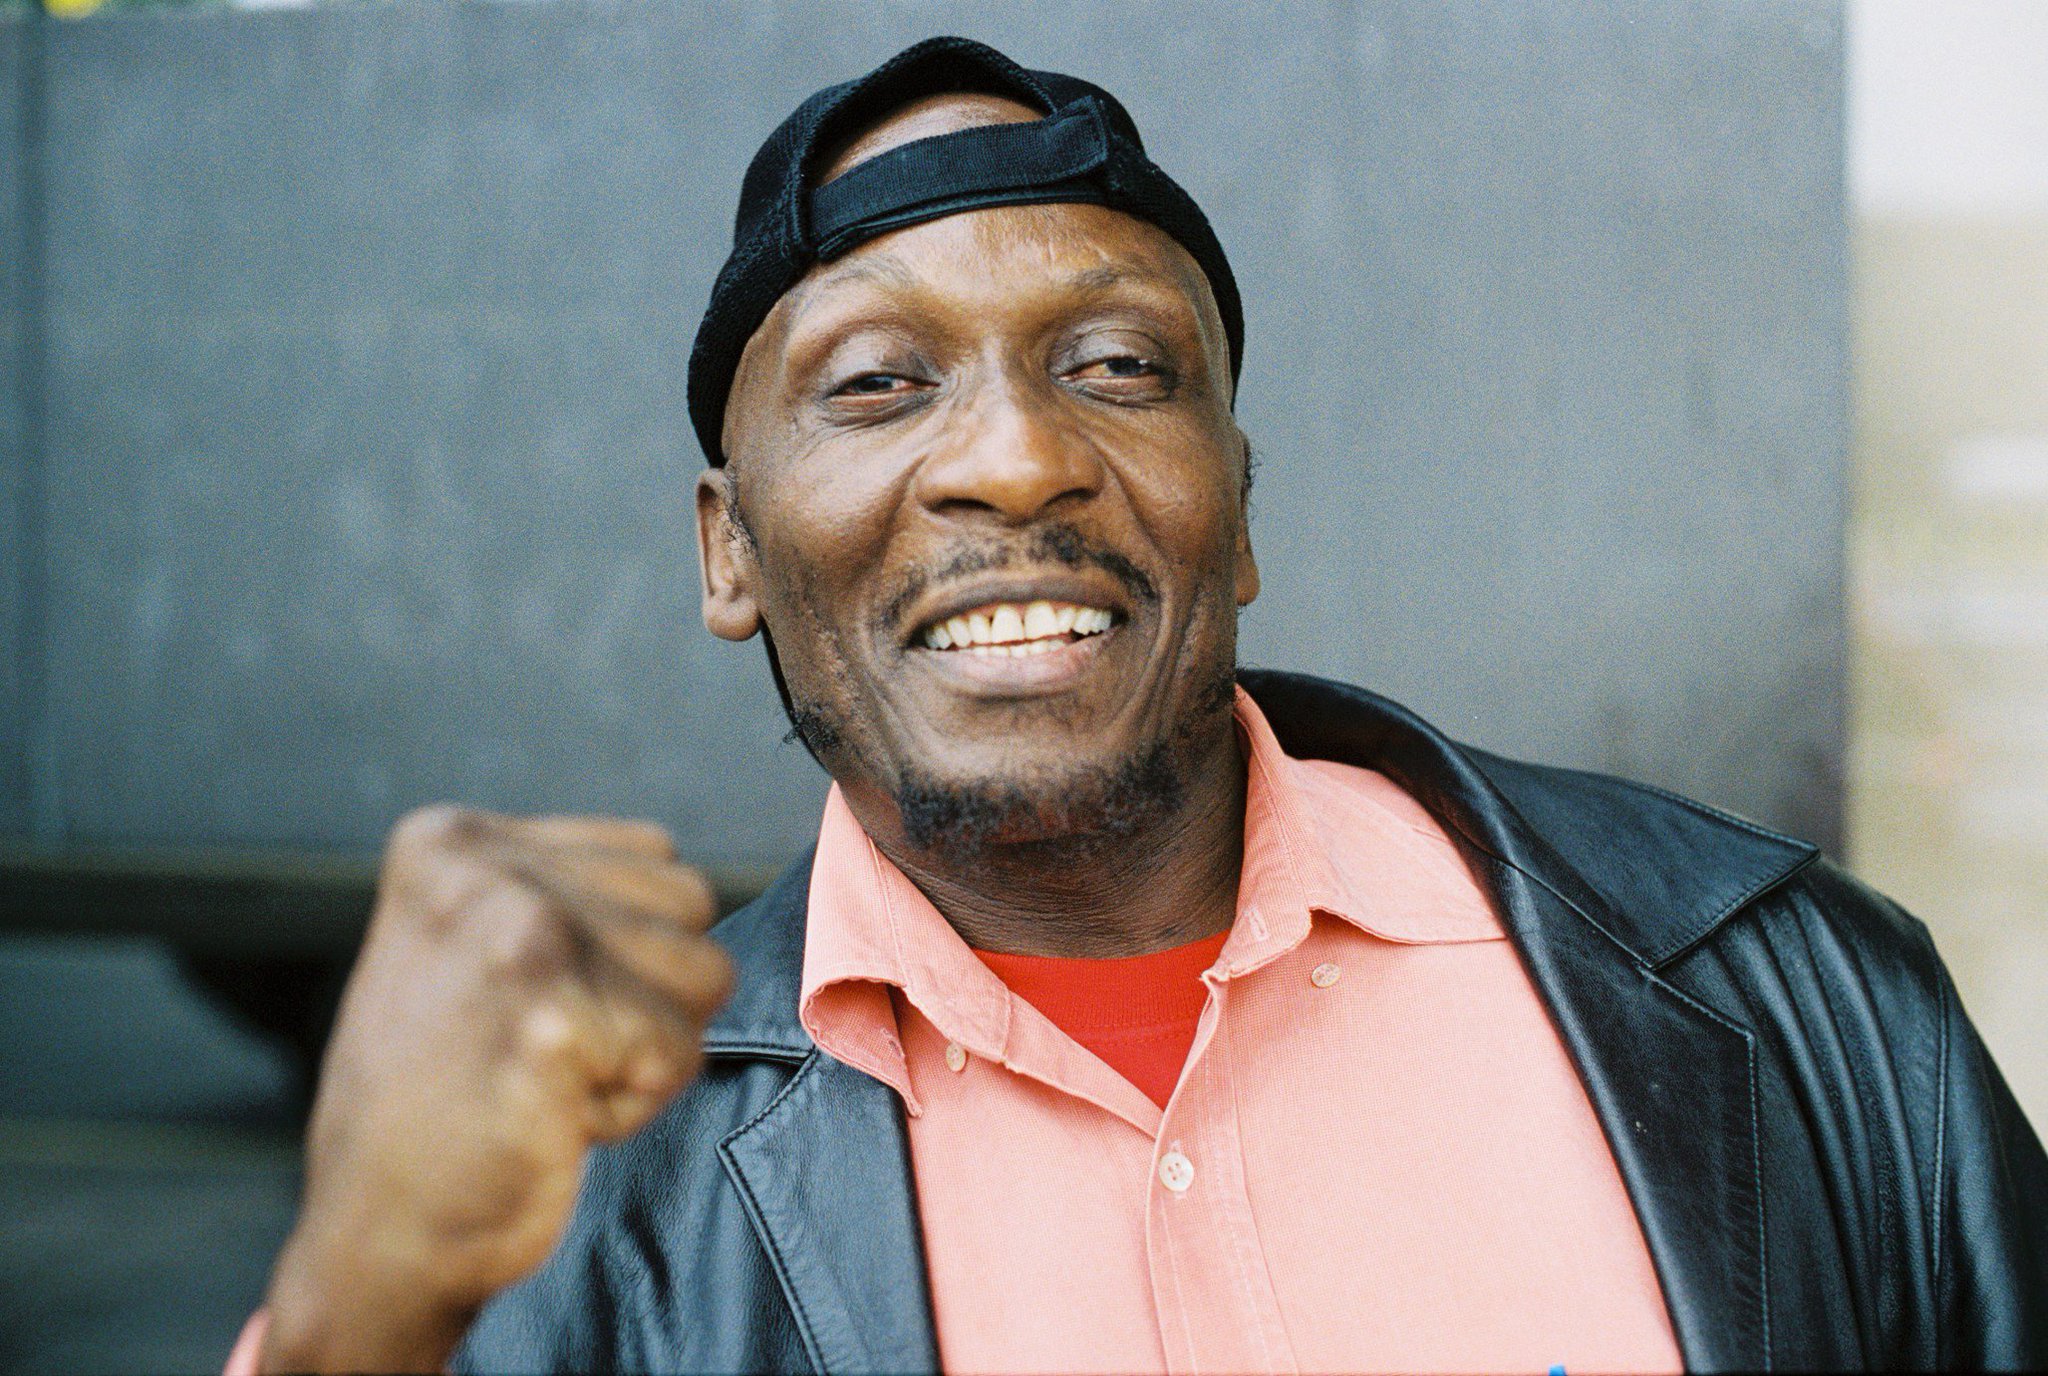 Happy Easter and happy birthday to this reggae legend Jimmy Cliff 